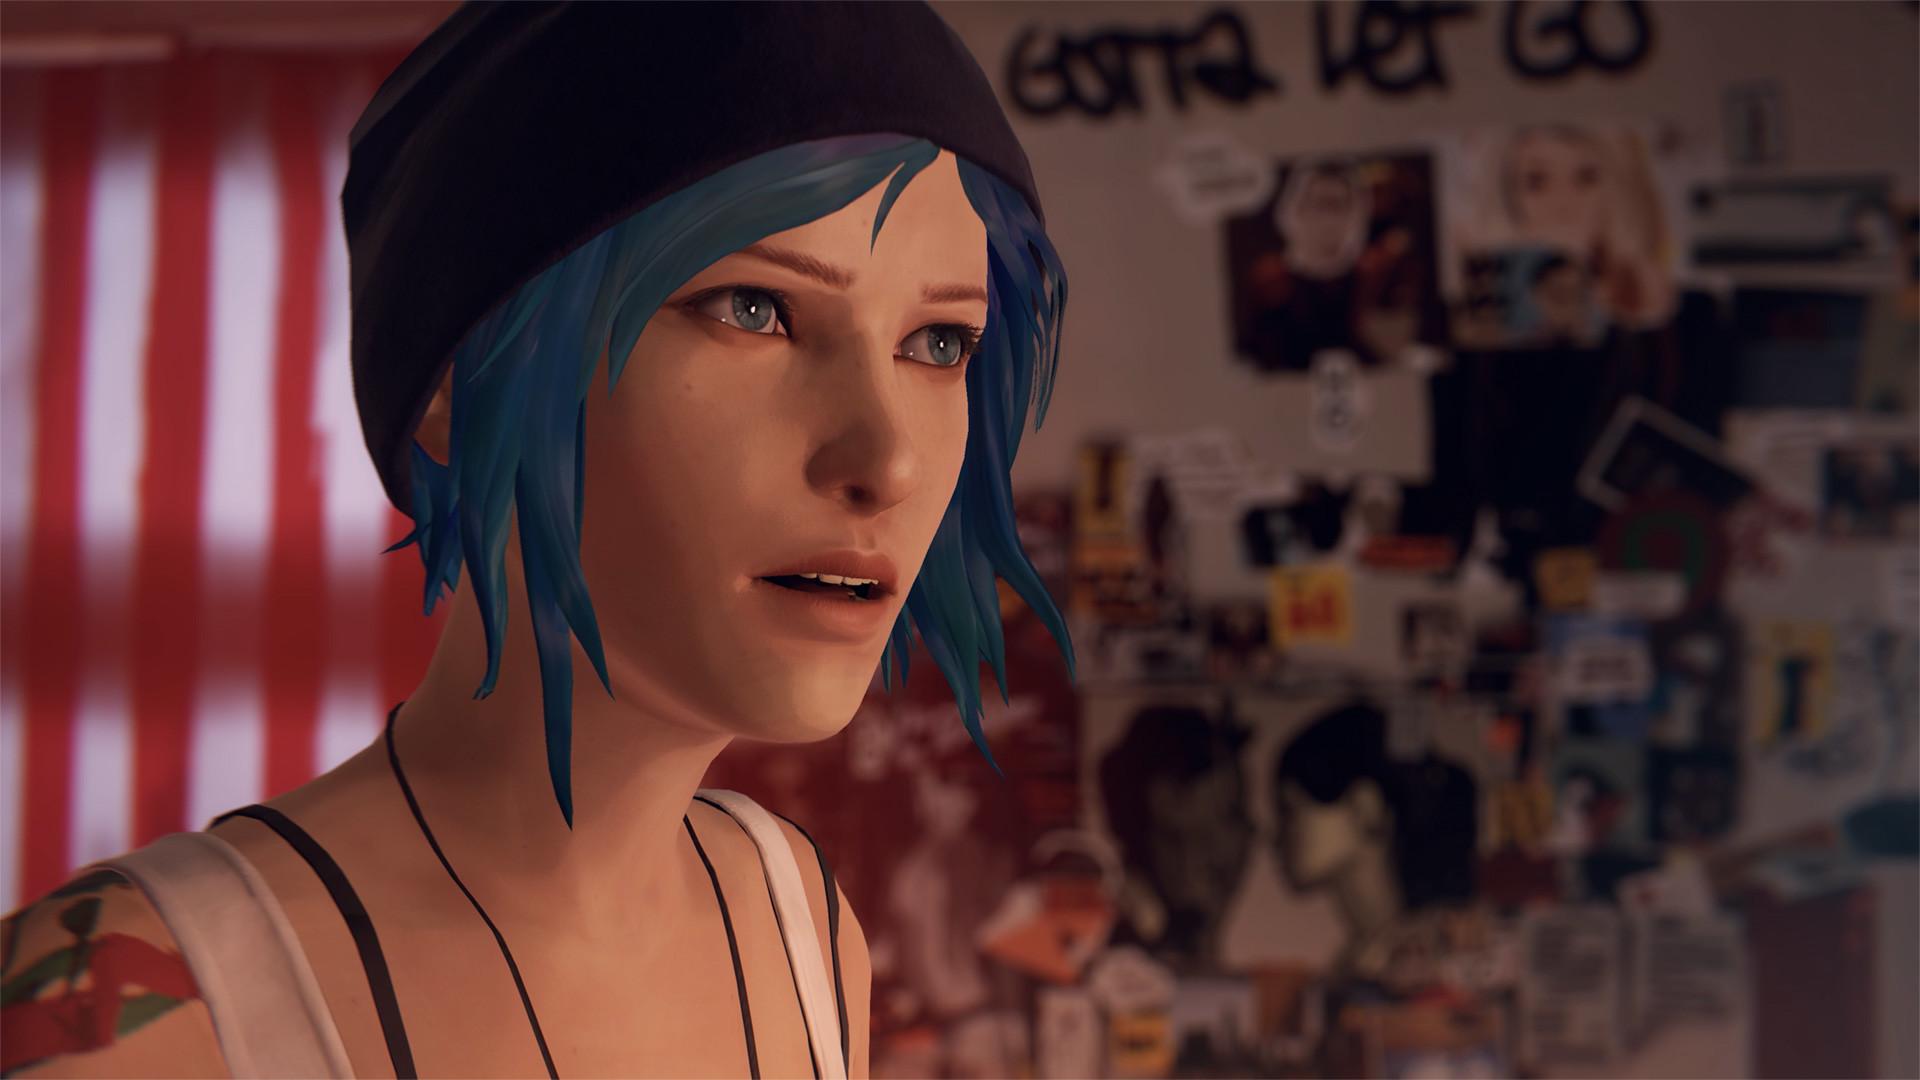 Screenshot №1 from game Life is Strange Remastered